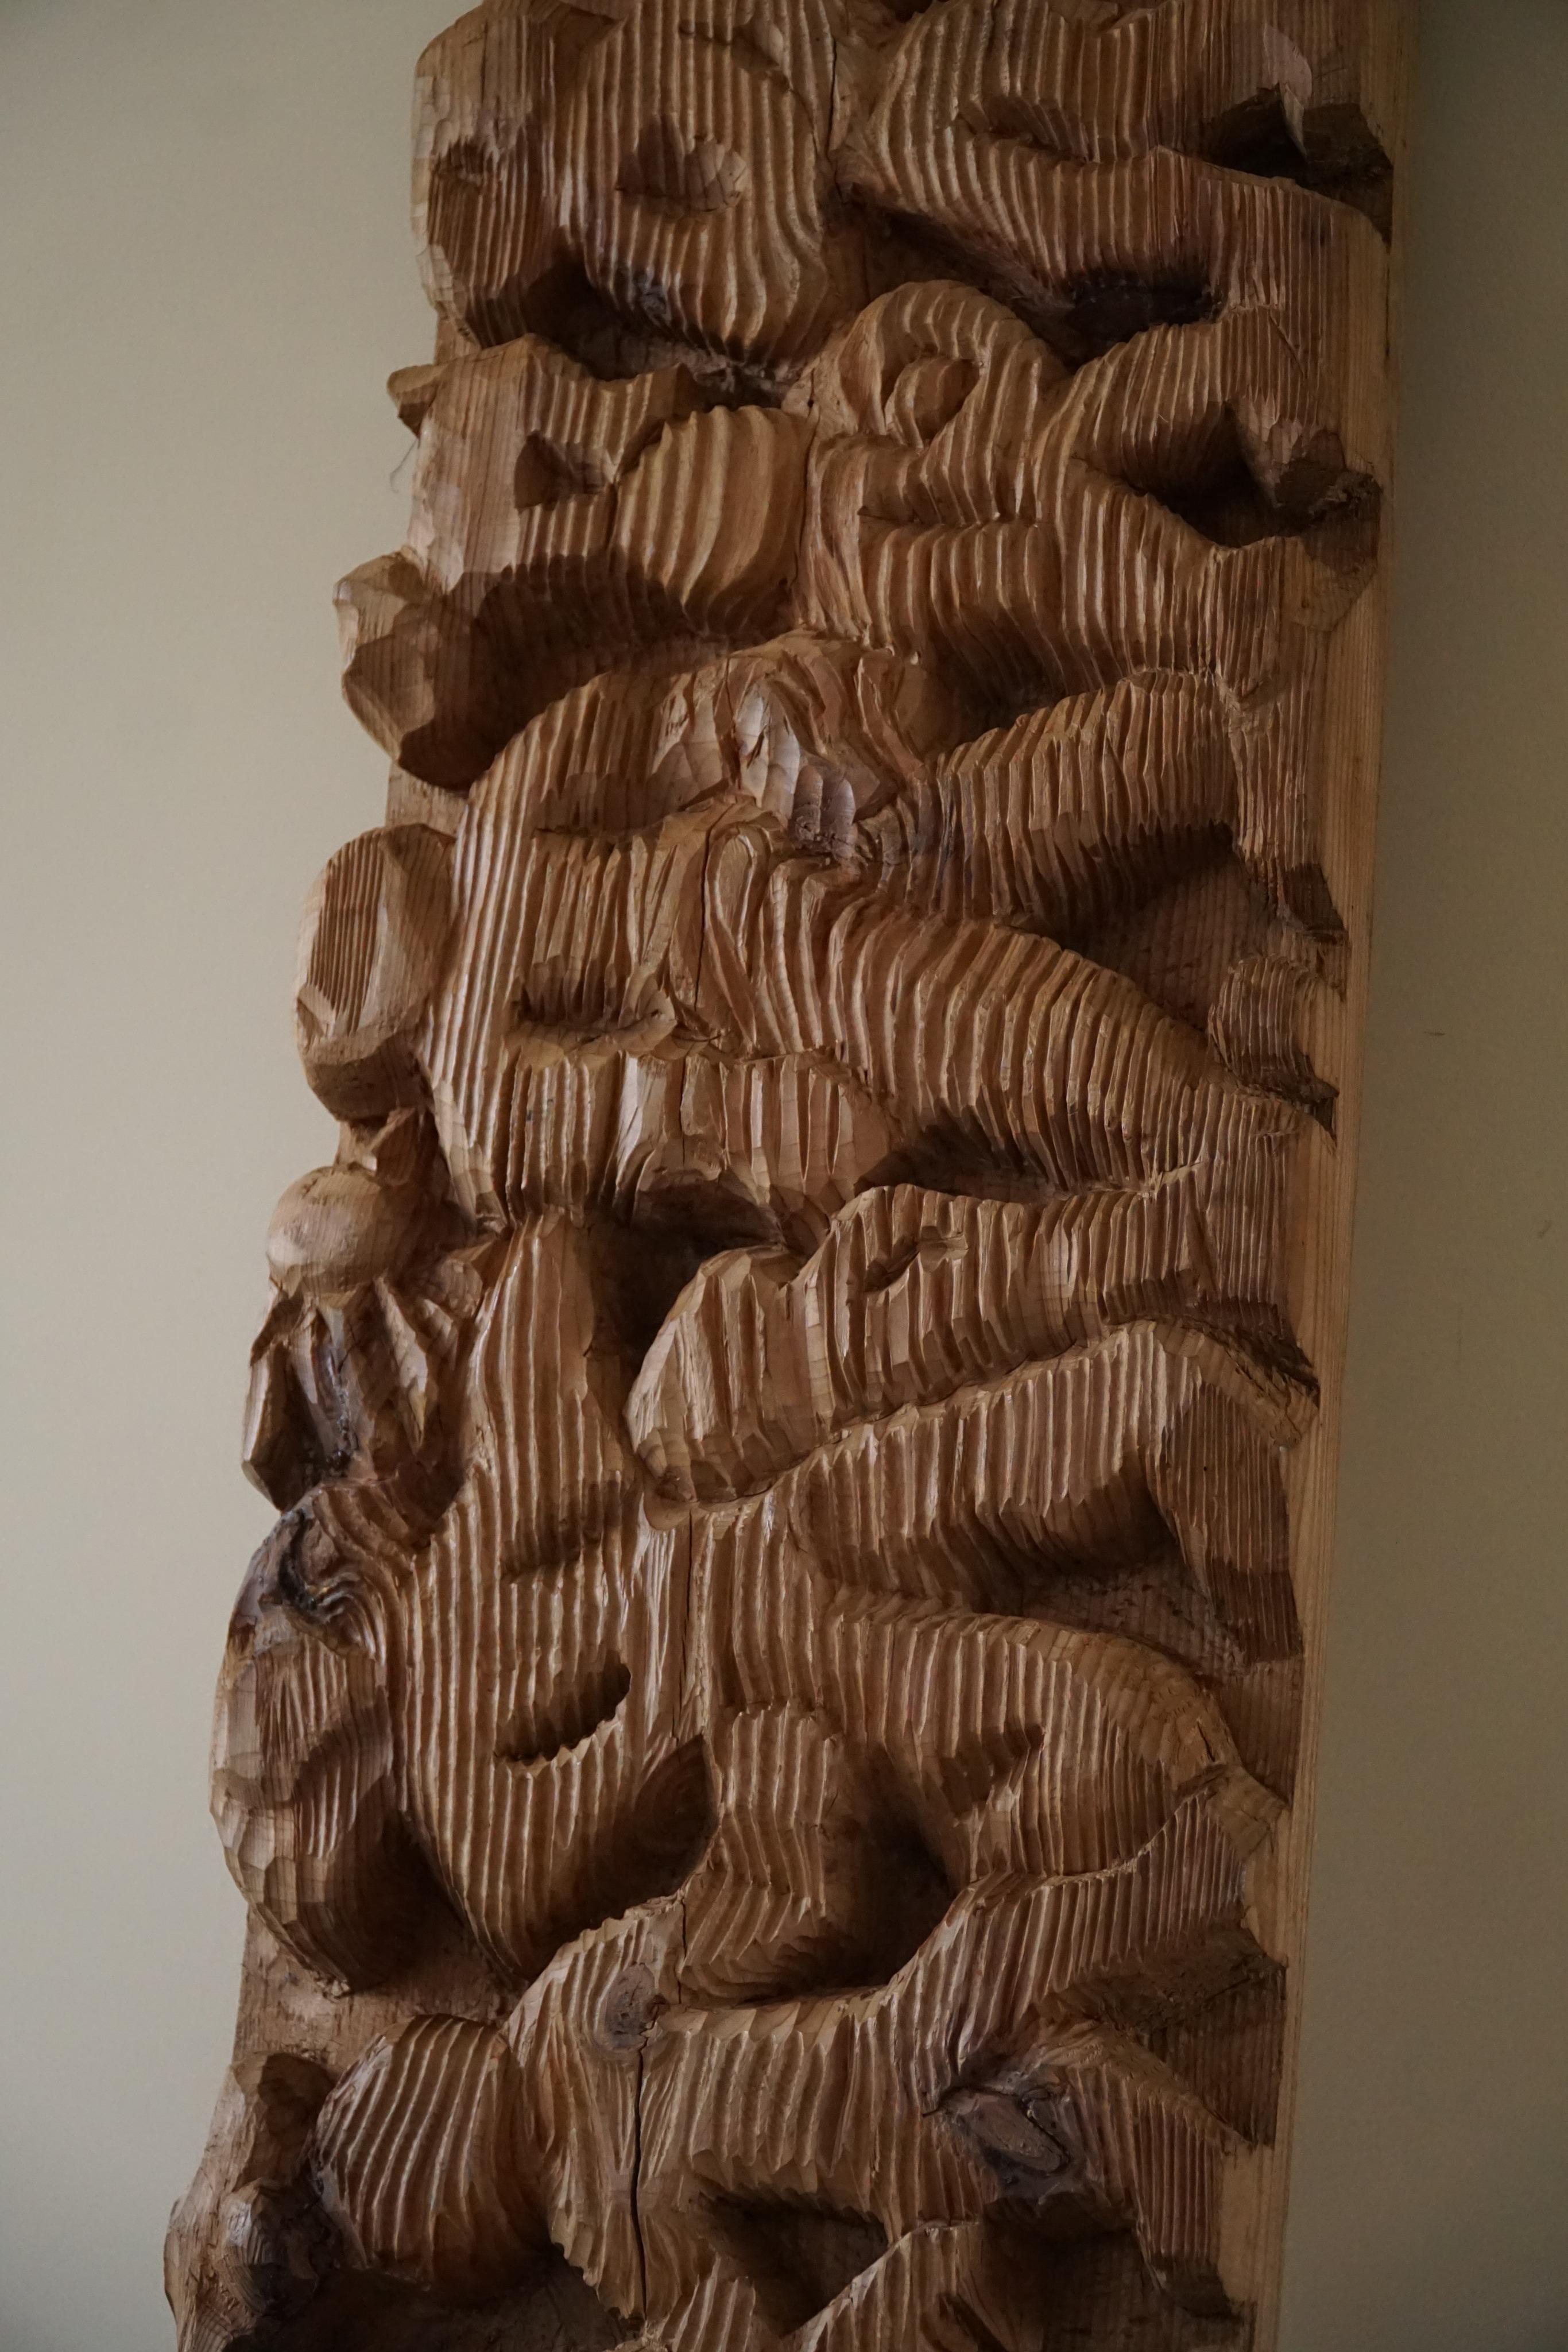 Decorative Hand Carved Wood-Sculpture, Midcentury, Danish Cabinetmaker, 1970s For Sale 1